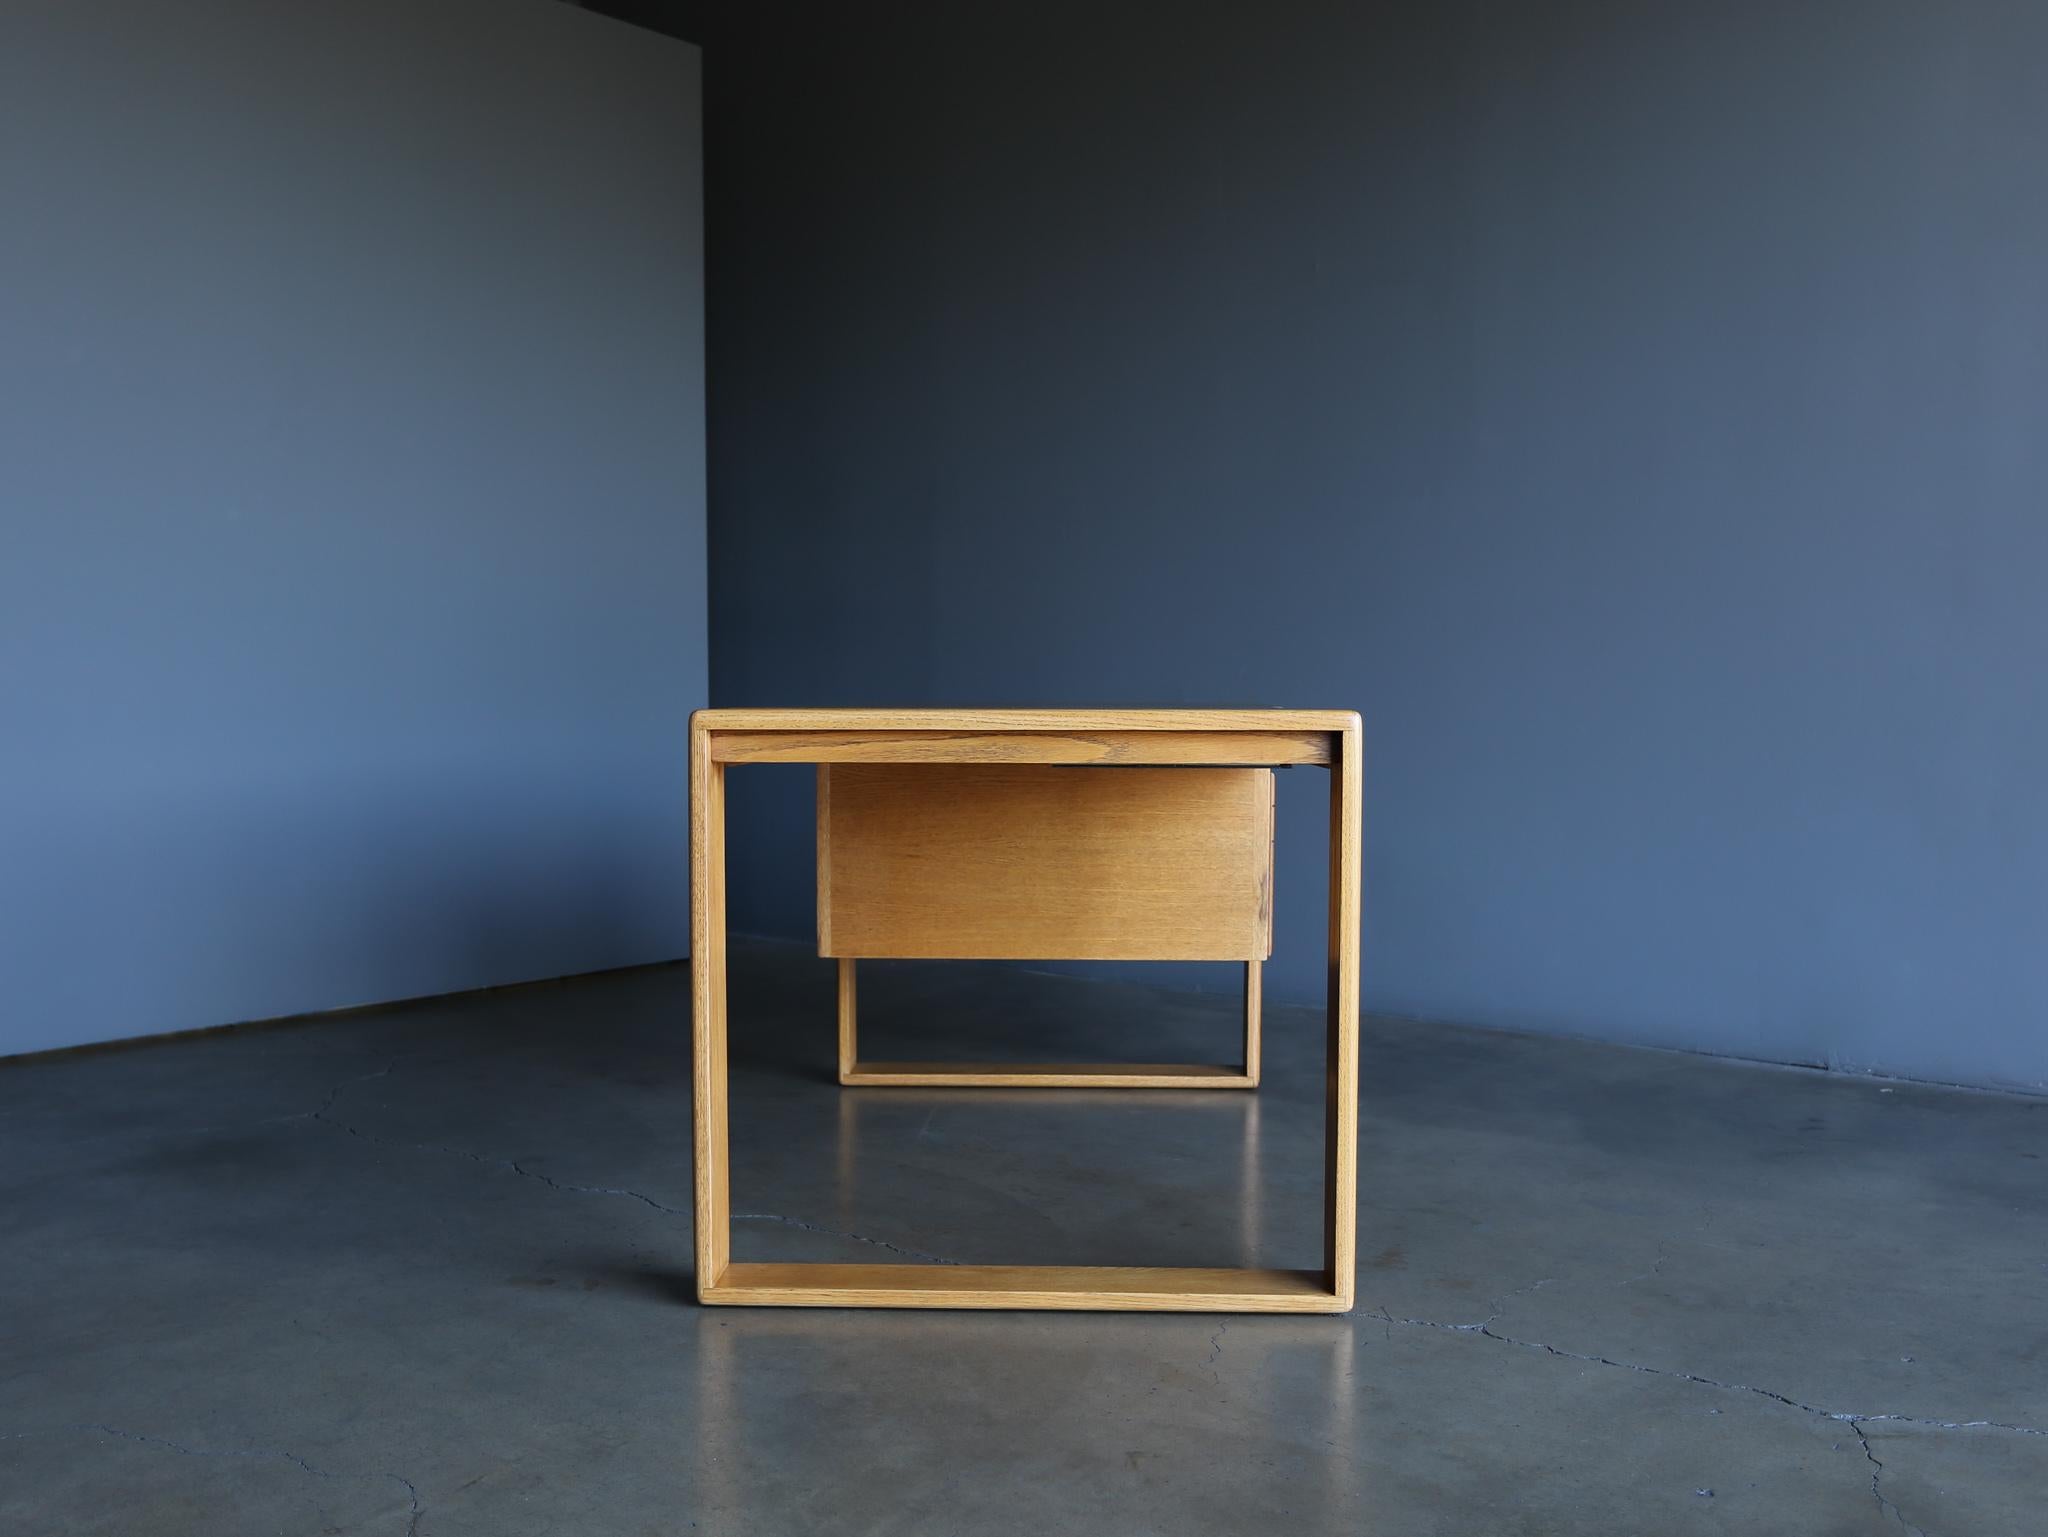 Hand-Crafted Lou Hodges Handcrafted Oak Desk for California Design Group, 1978